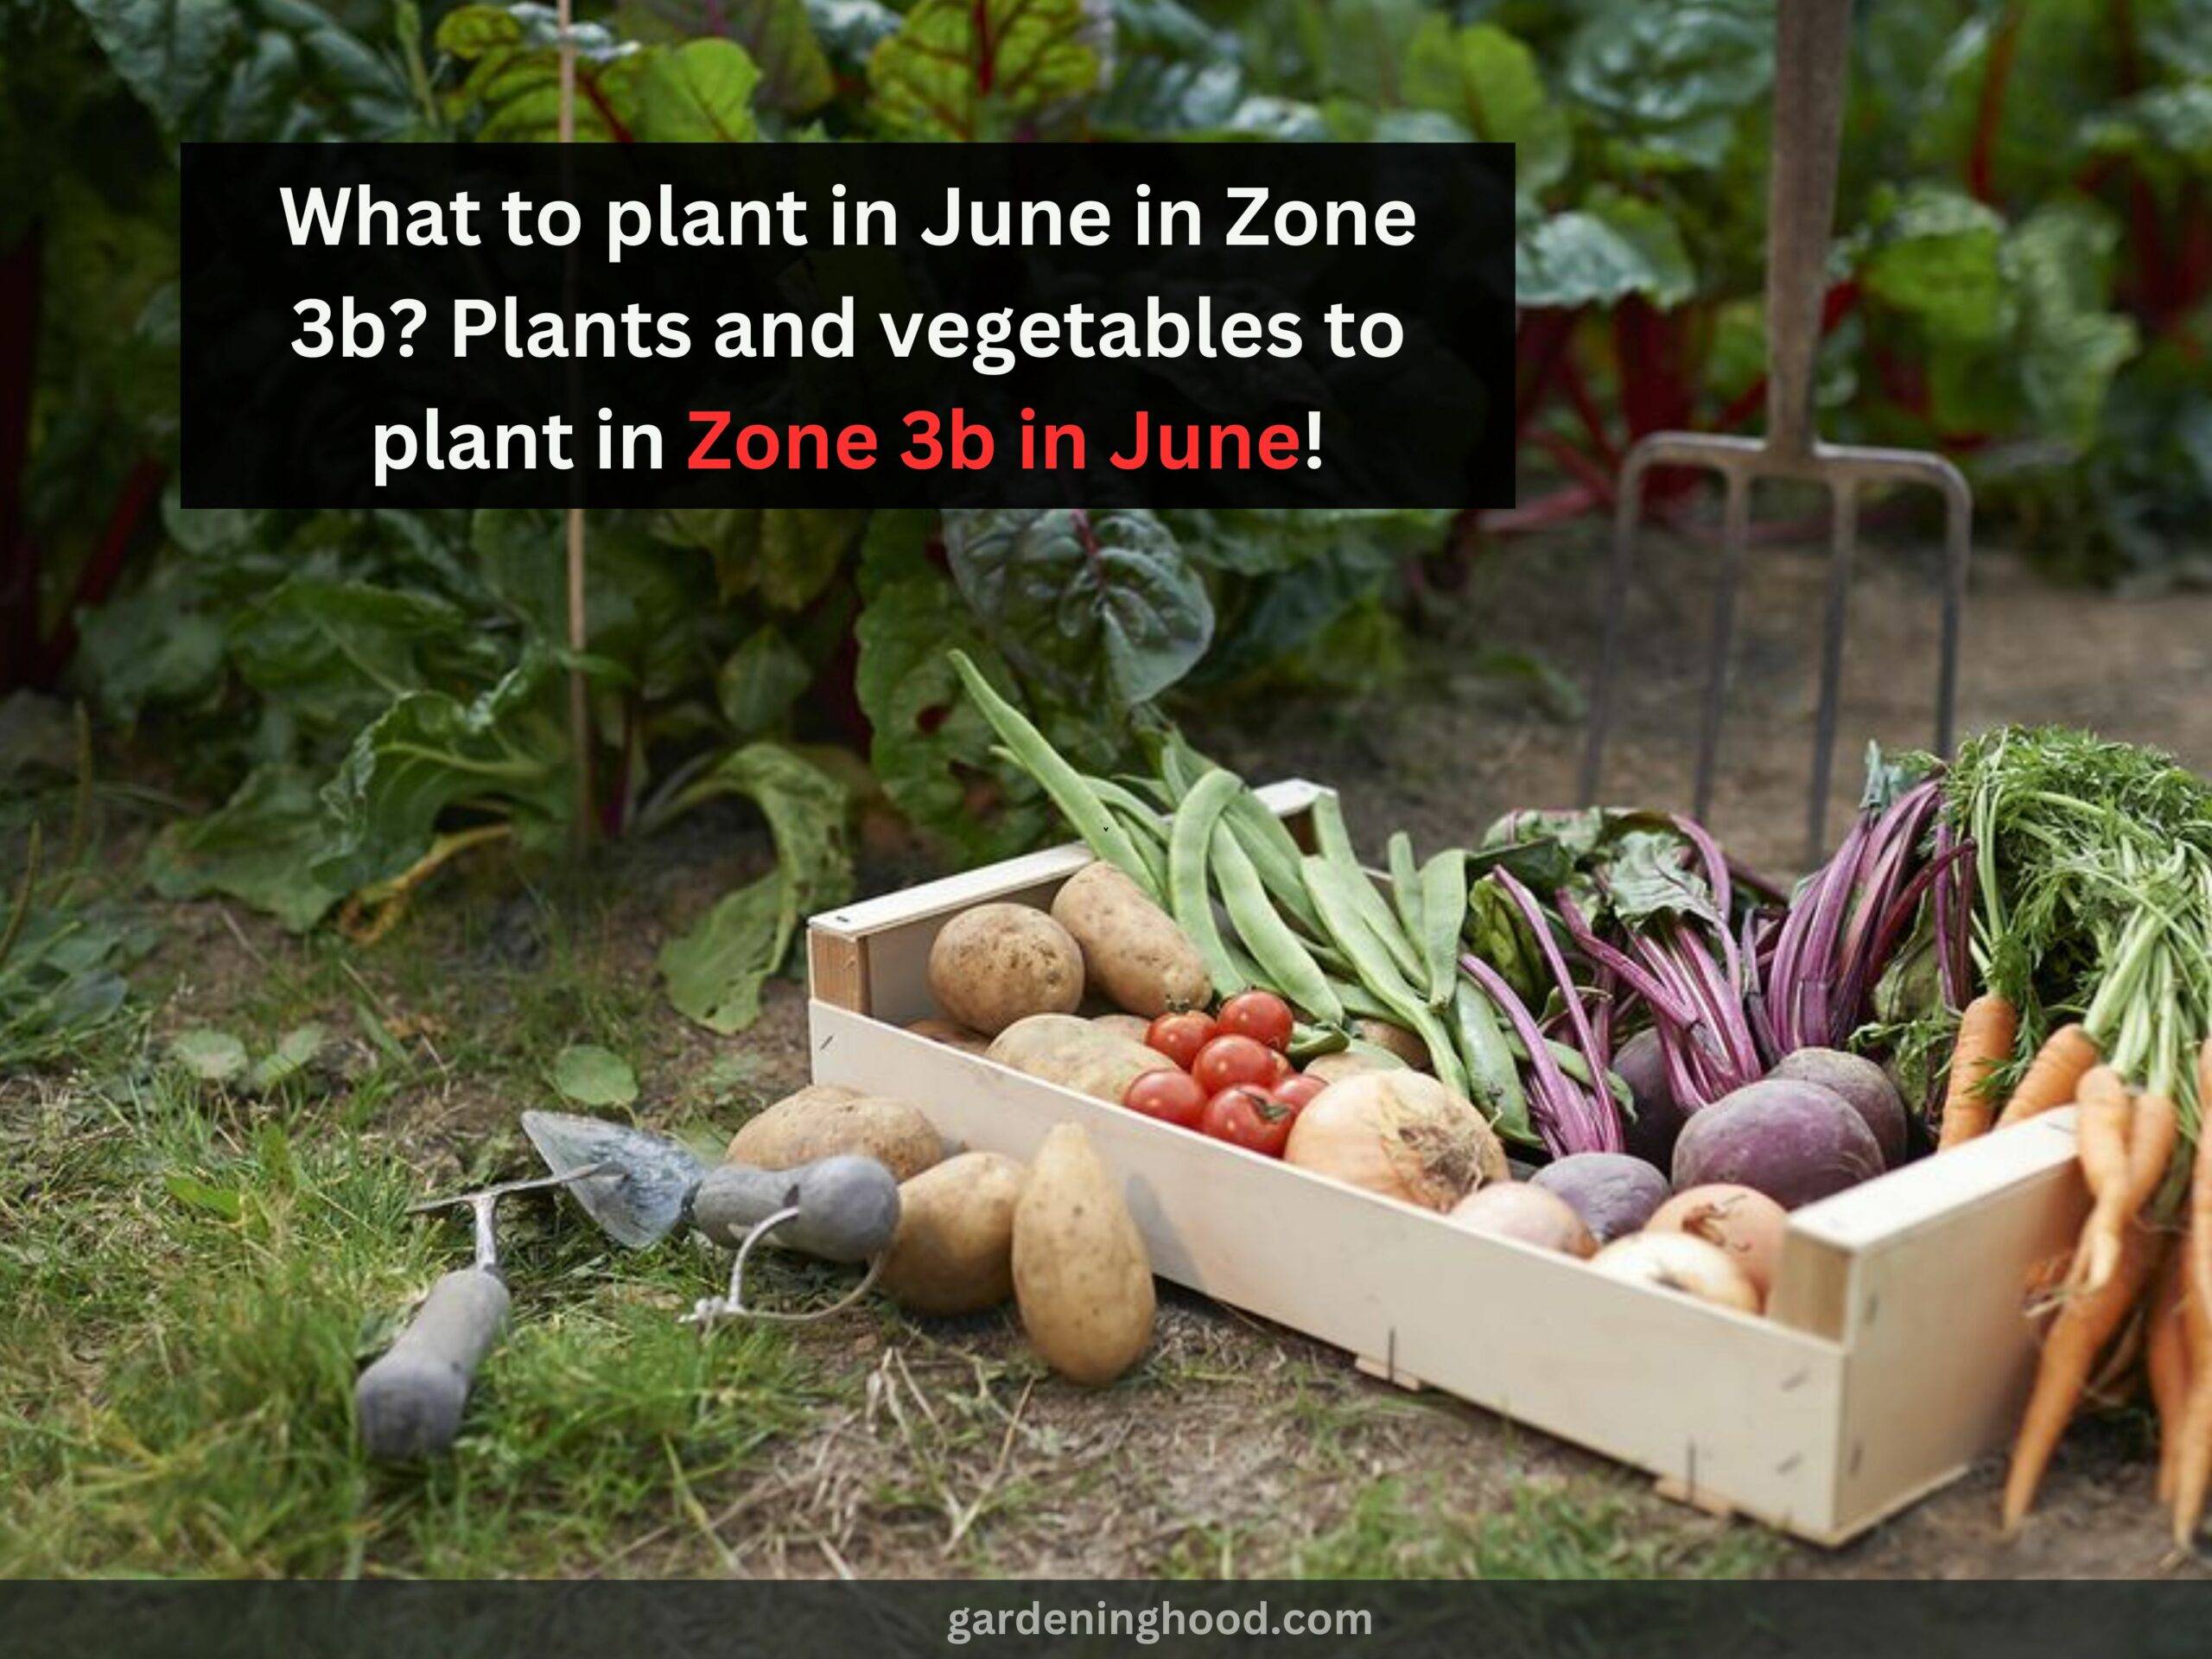 What to plant in June in Zone 3b? Plants and vegetables to plant in Zone 3b in June!